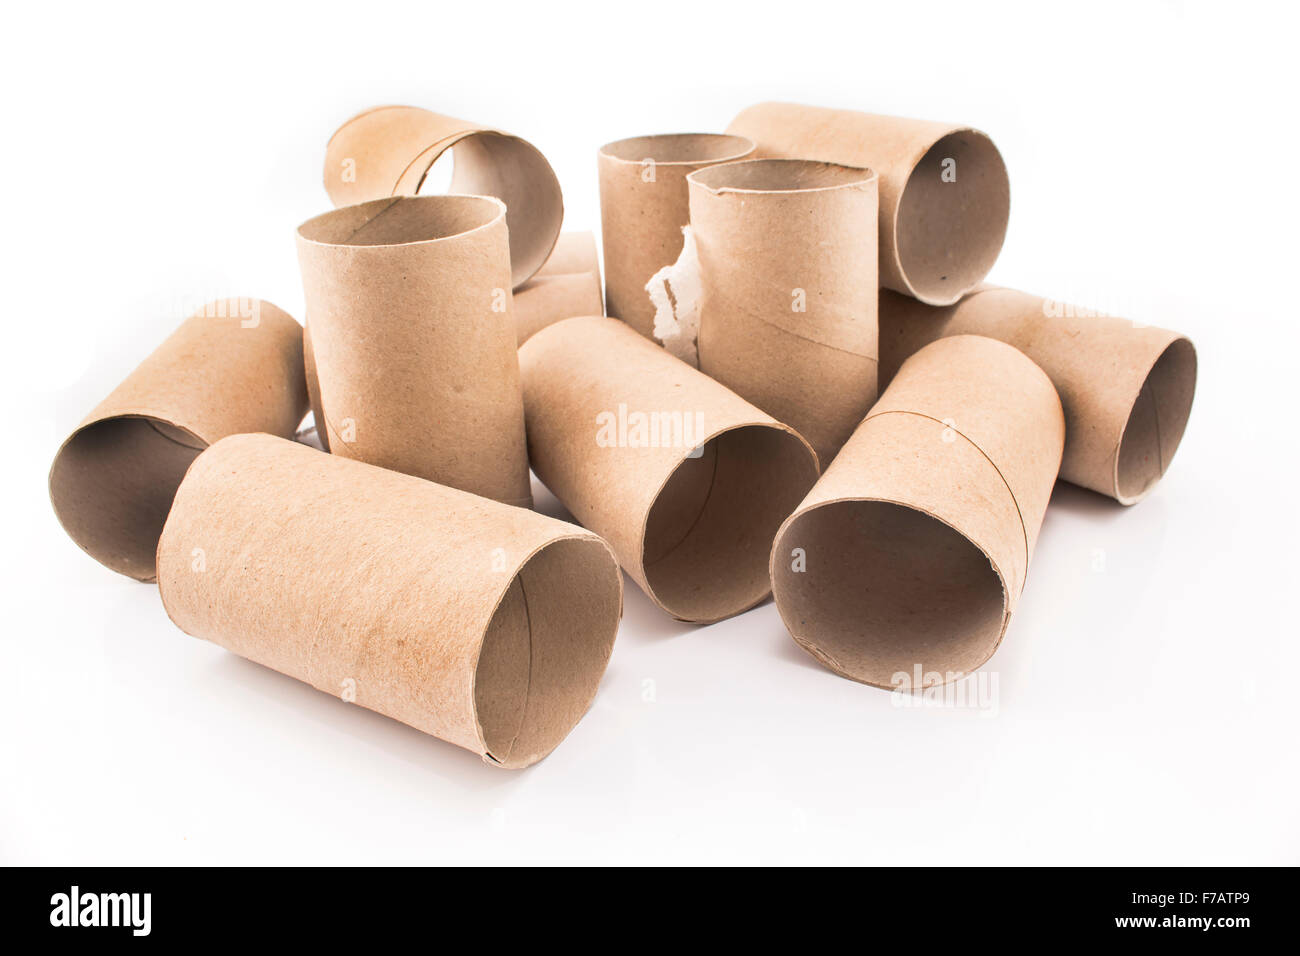 Empty toilet paper rolls isolated on white. Stock Photo